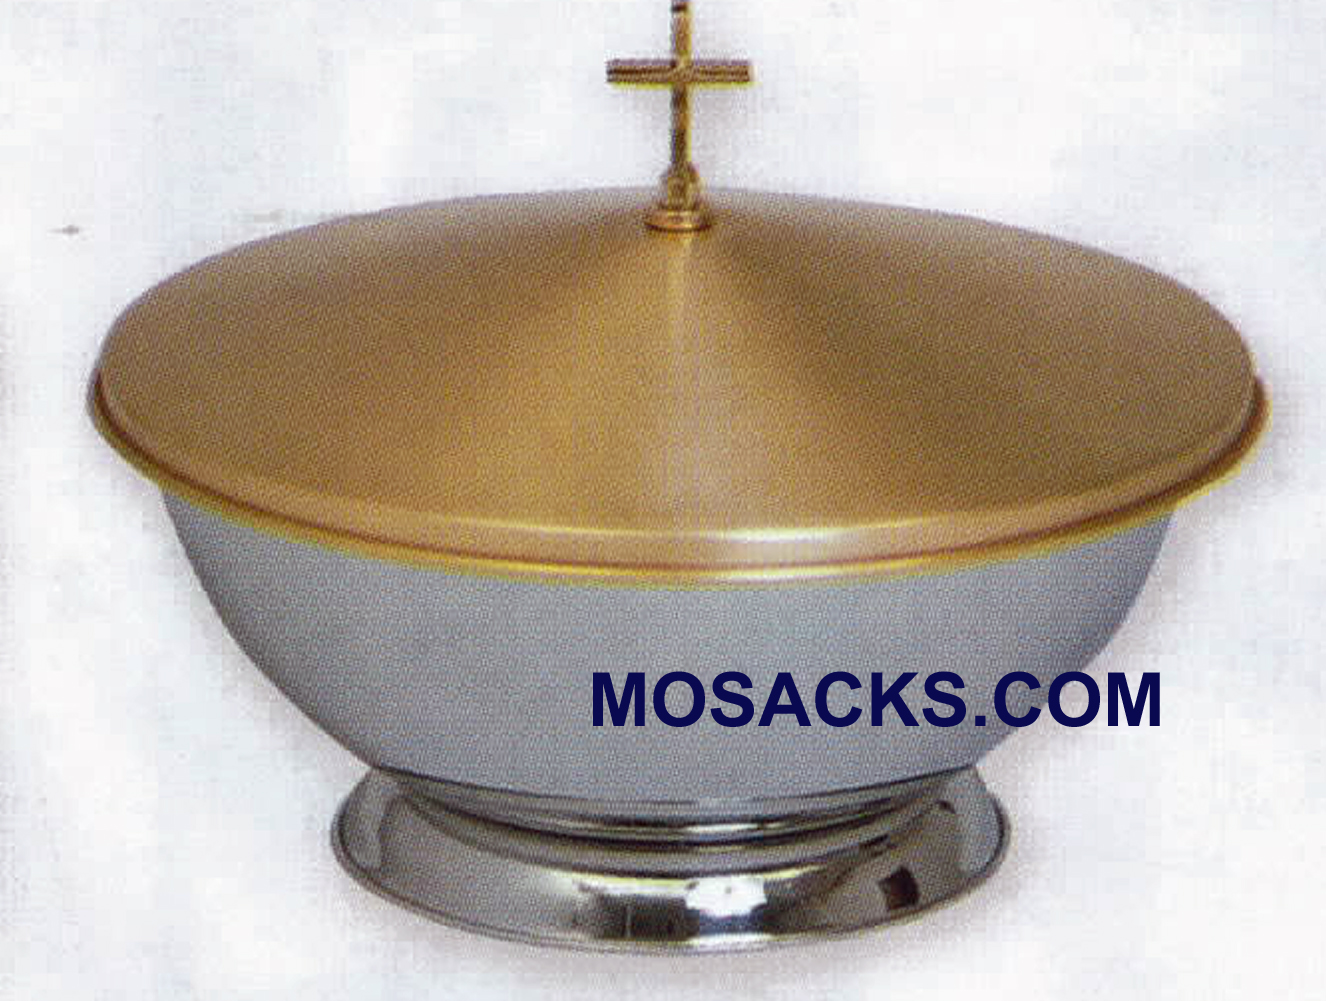 Portable Baptismal Font With 16" Stainless Steel Baptismal Bowl and Satin Bronze Baptismal Cover - K351